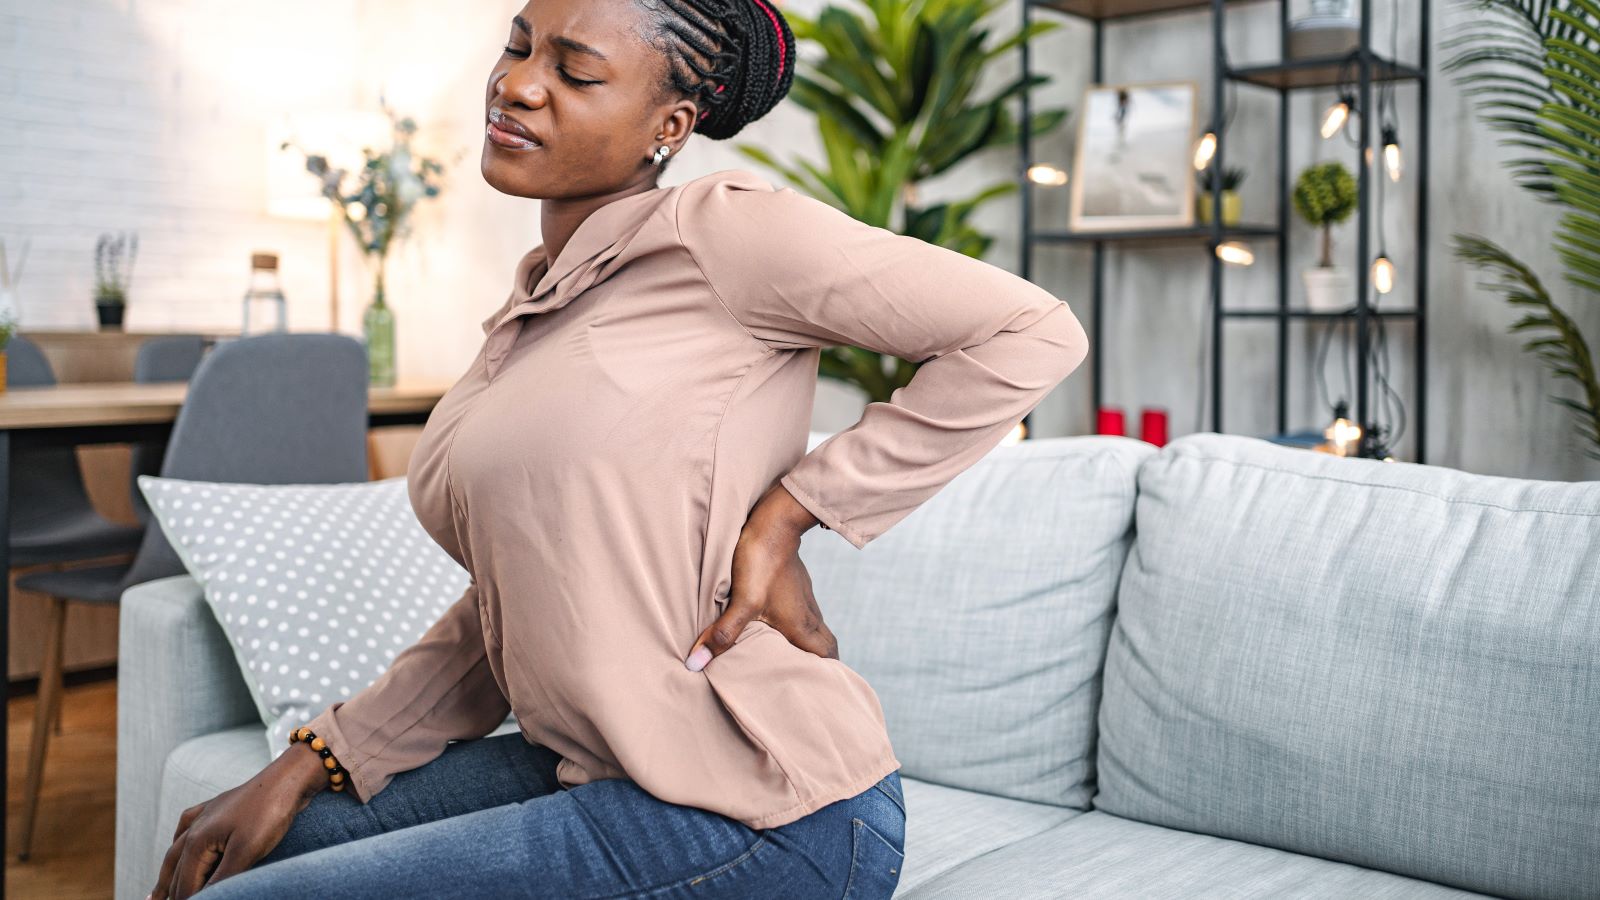 4 Signs It’s Time to See a Doctor for Your Back Pain